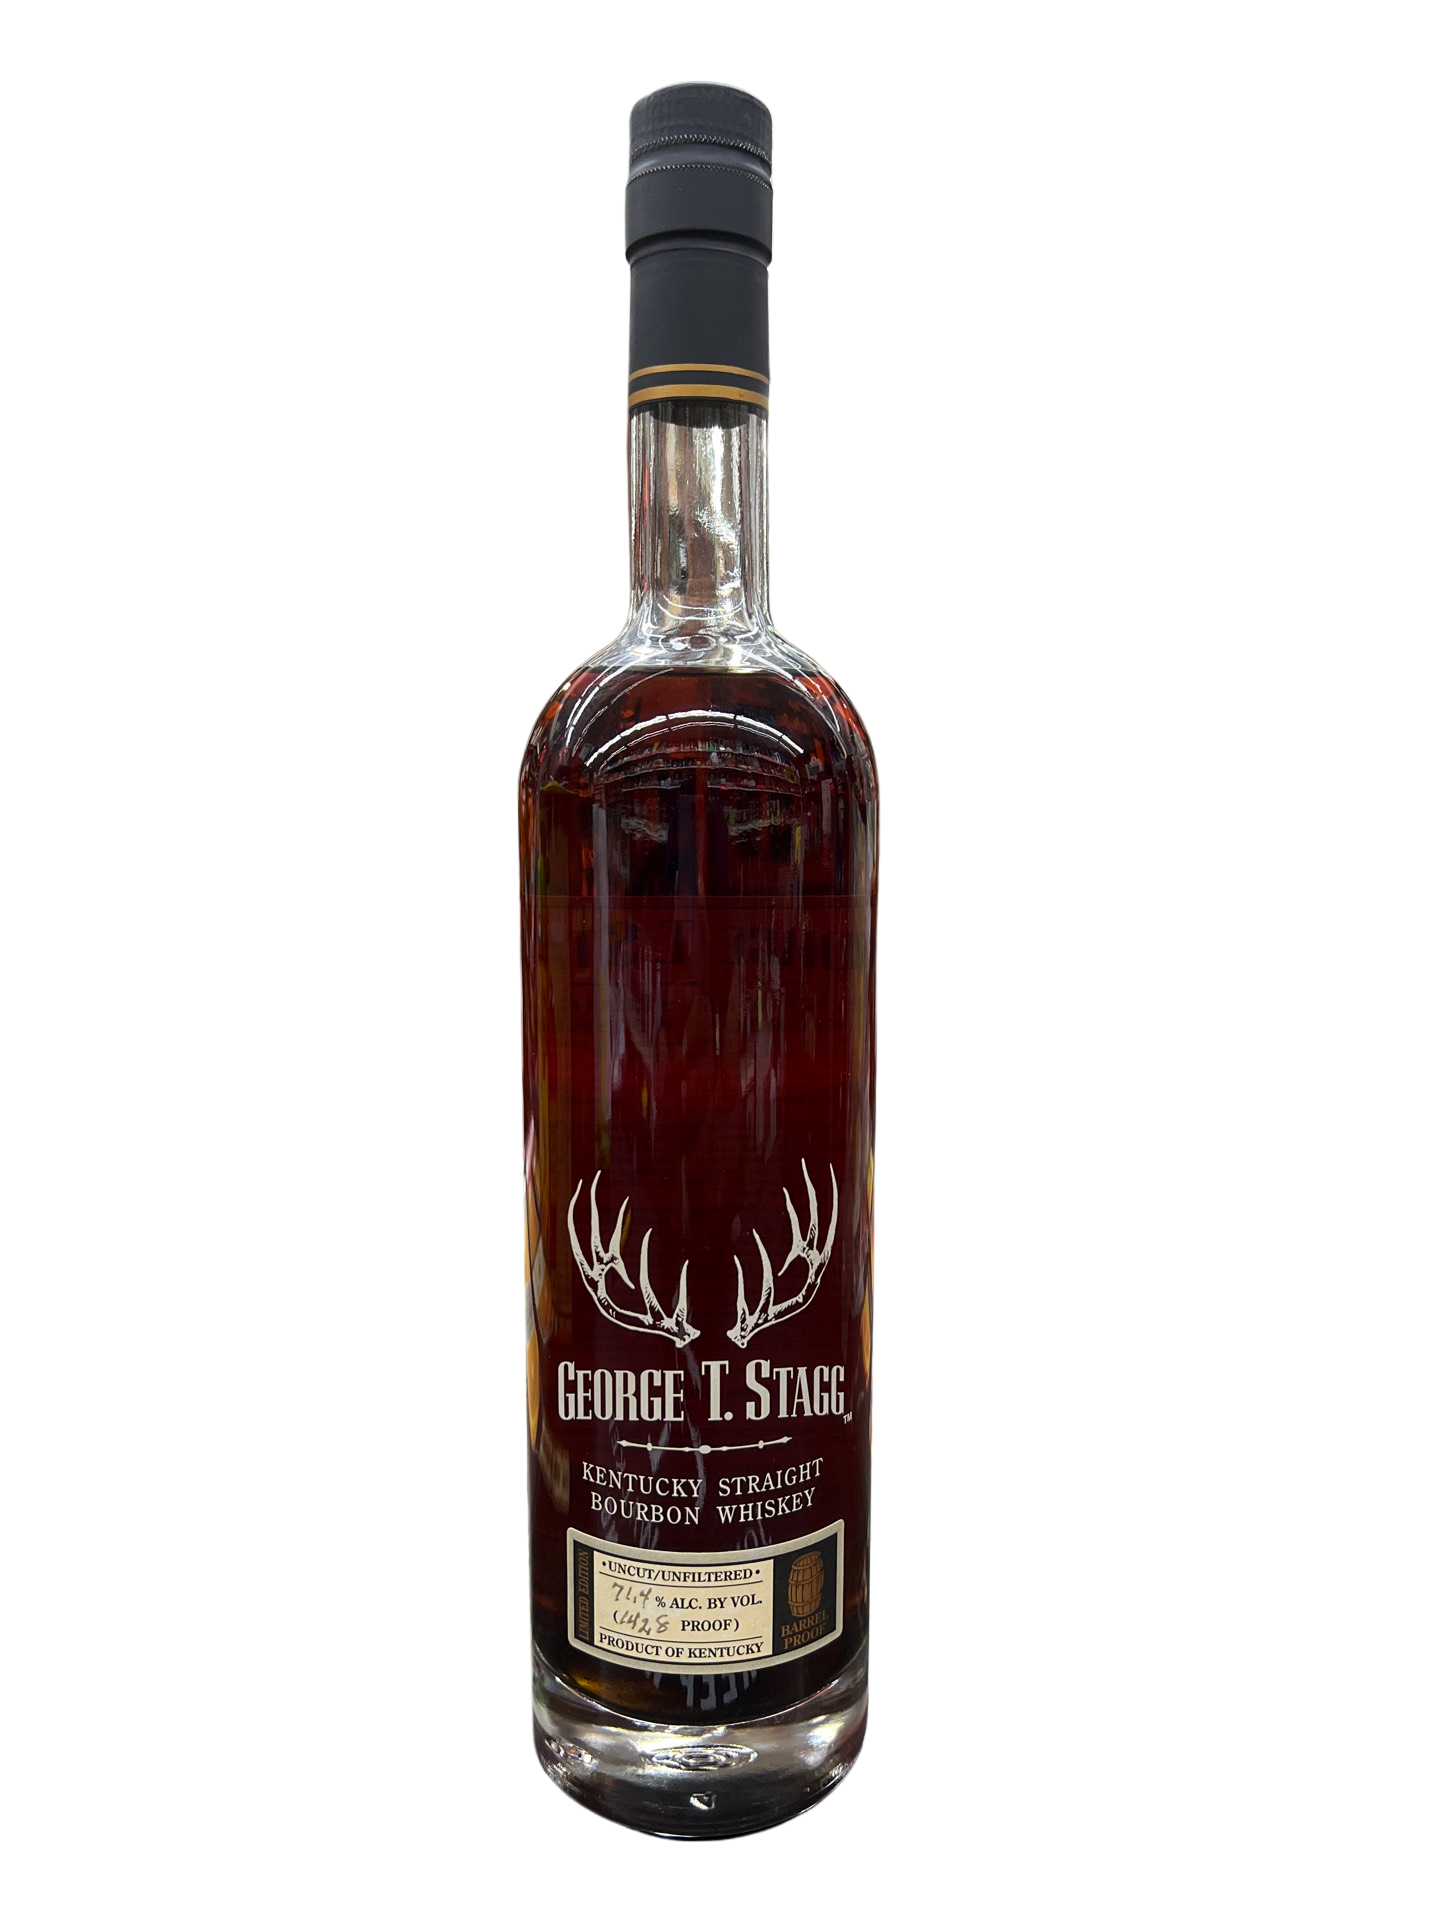 George T. Stagg Bourbon 2012 142.8 Proof